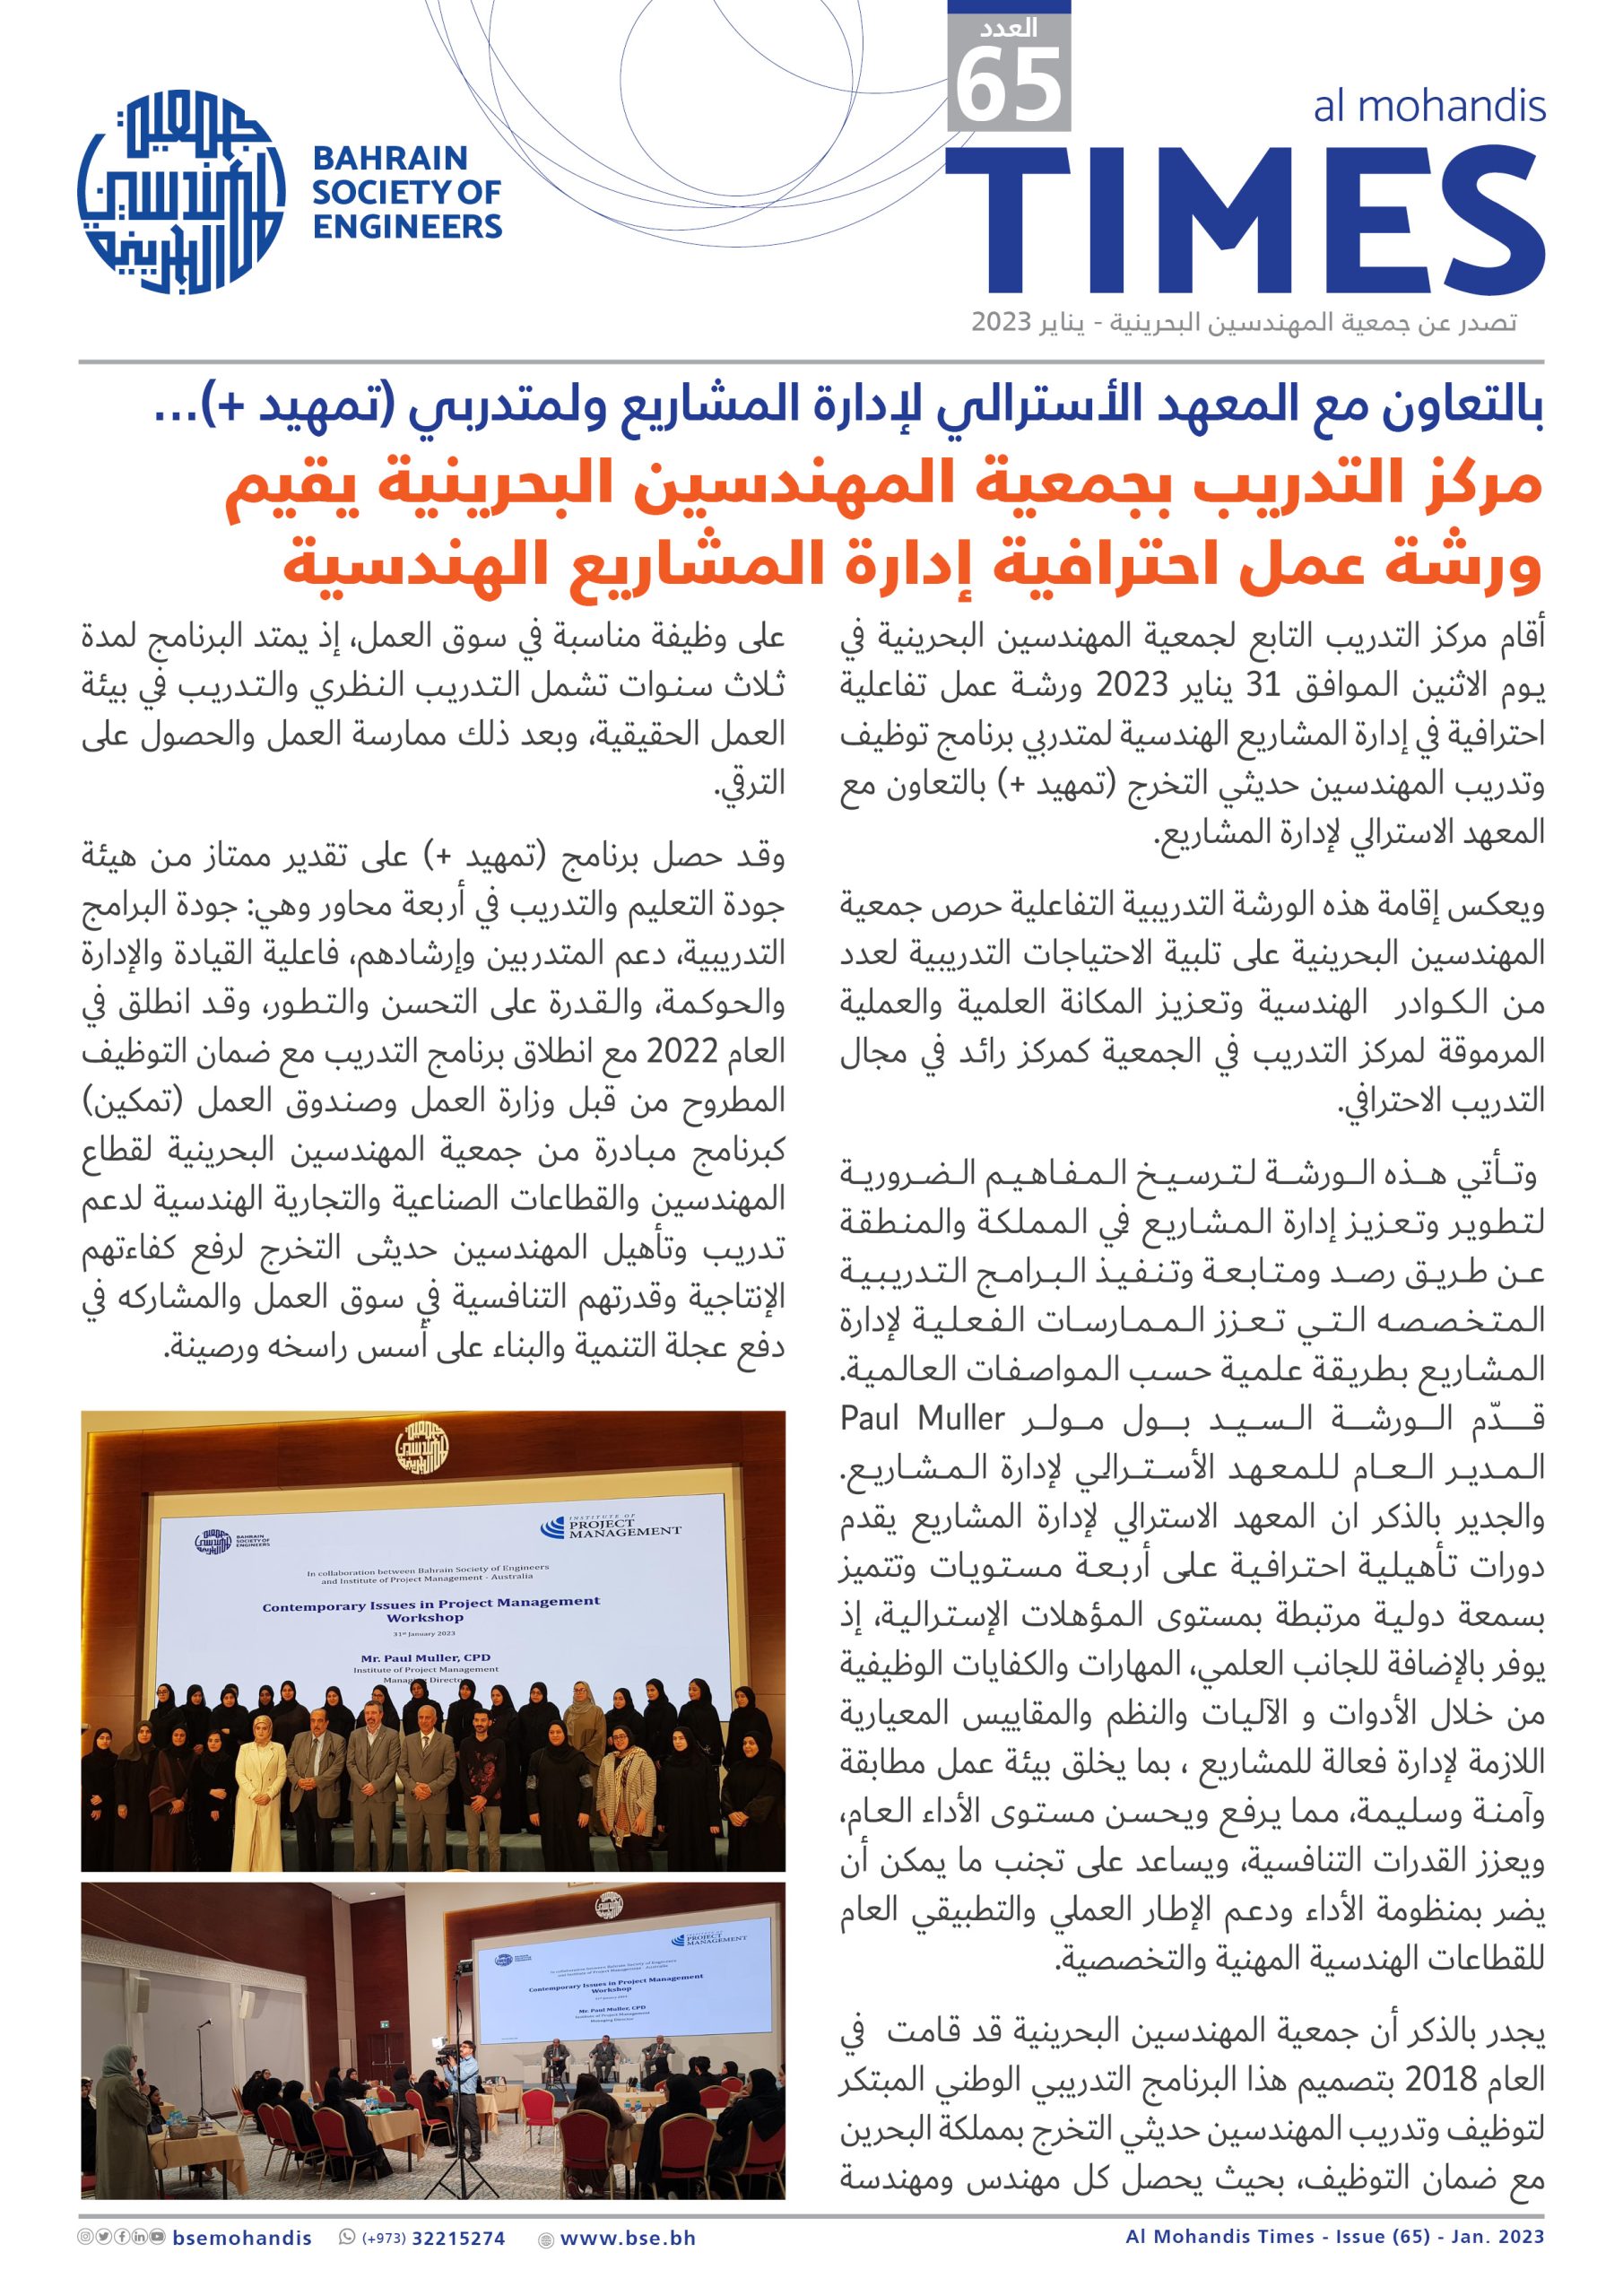 Al Mohandis Times Issue 65